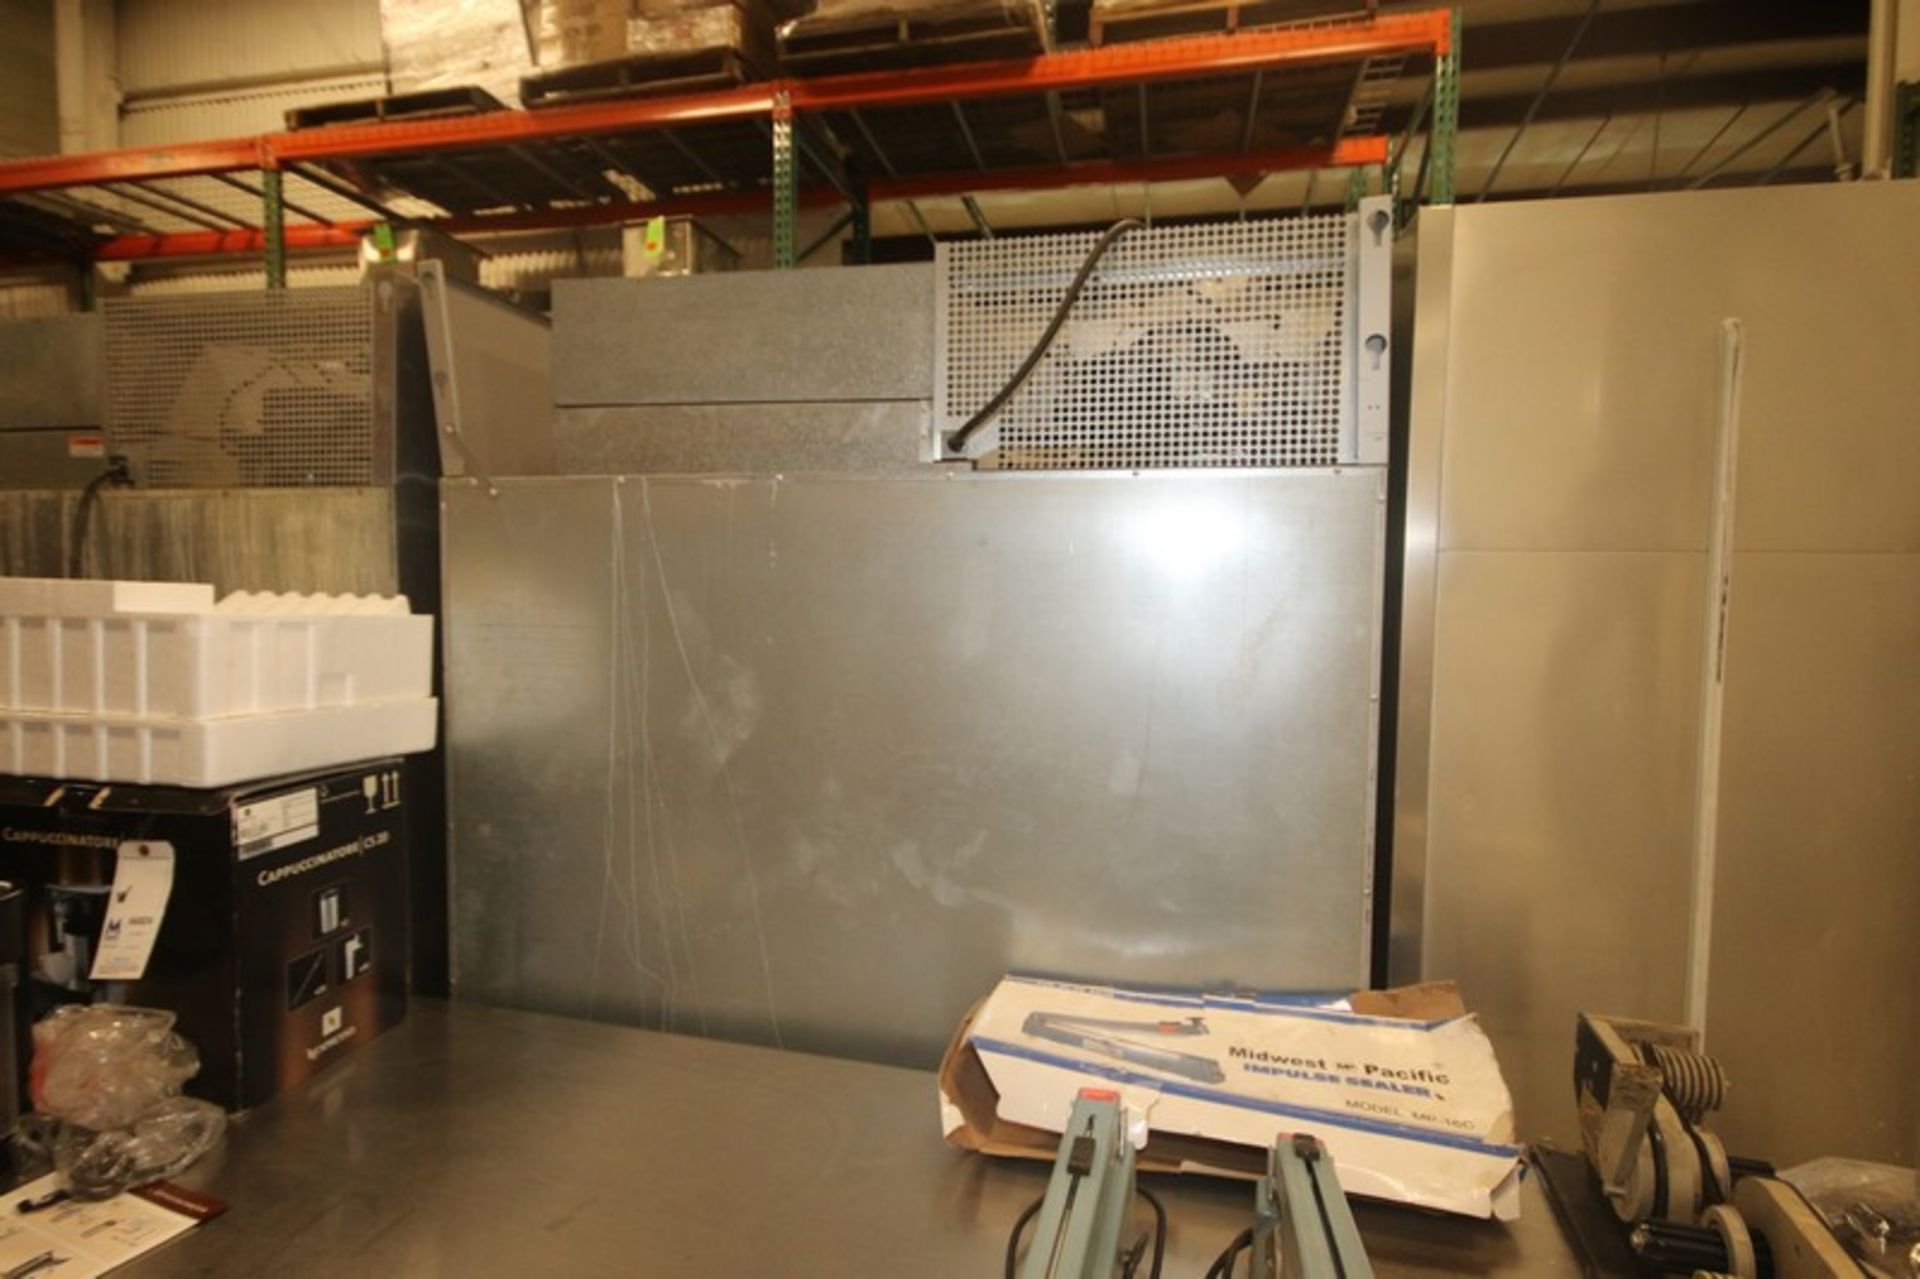 Hobart Double Door Freezer,with Internal Pan Rack Inserts, Overall Dims.: Aprox. 54" L x 33" W x 82" - Image 5 of 6